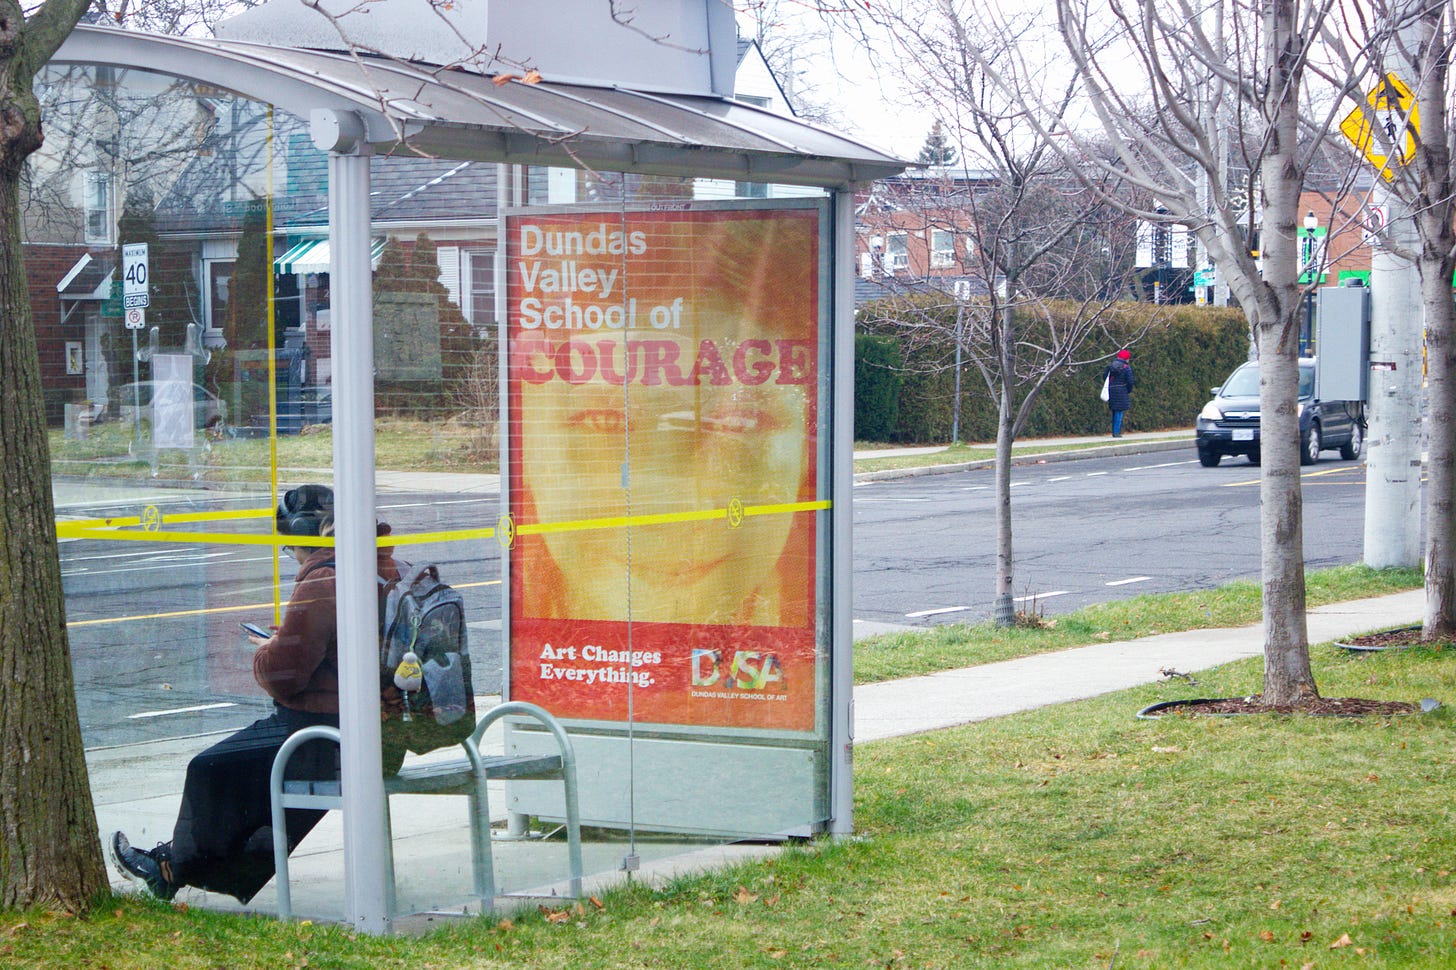 One of the DVSA bus ads. Main copy reads "Dundas Valley School of Courage" and shows a young child smiling.